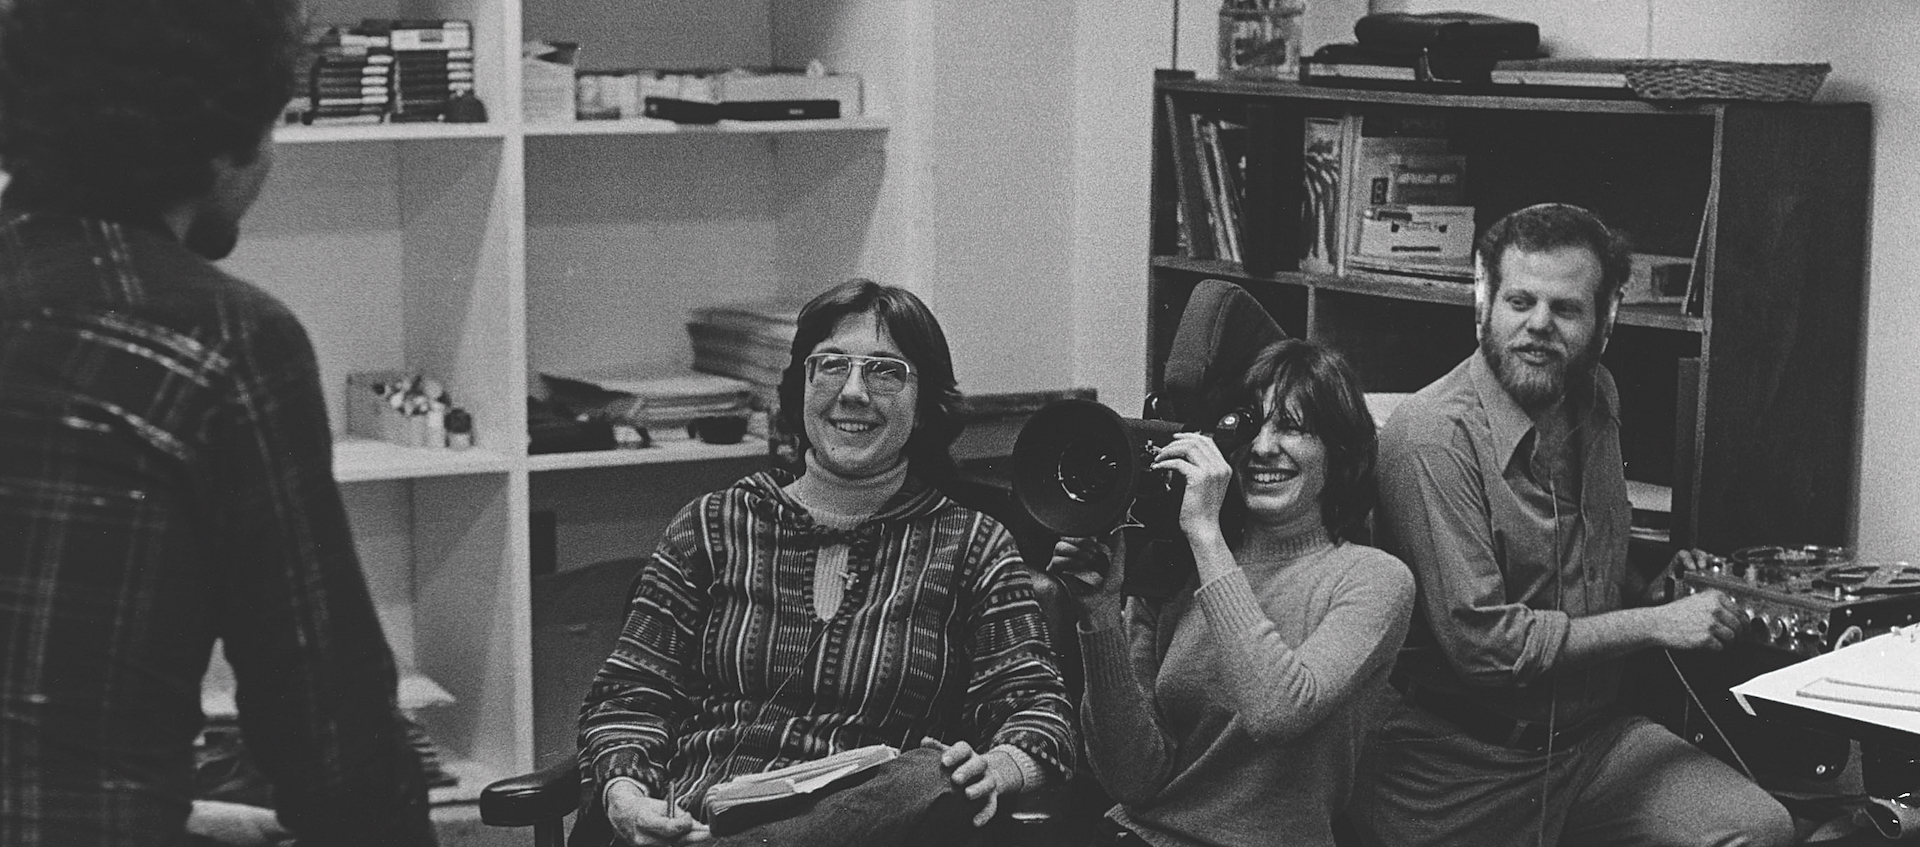 Julia Reichert and former directing partner Jim Klein in a black and white archive image circa early 1970s